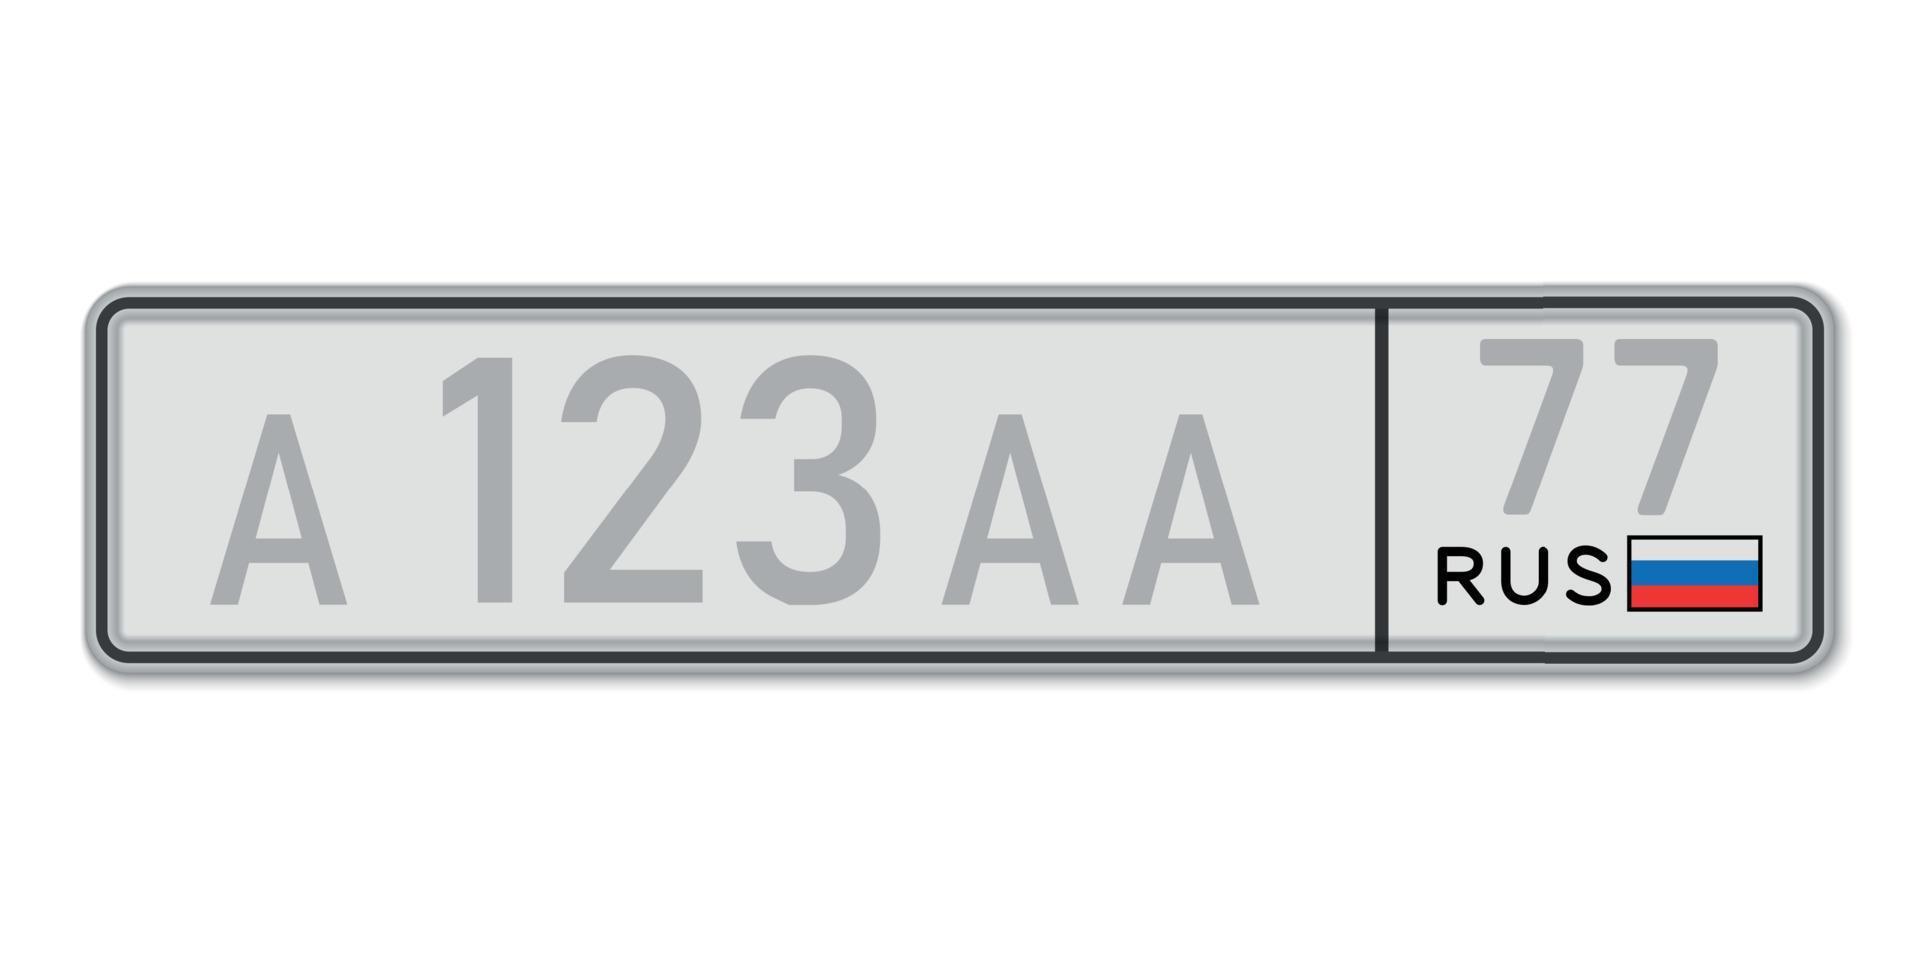 Car number plate. Vehicle registration license of Russia vector